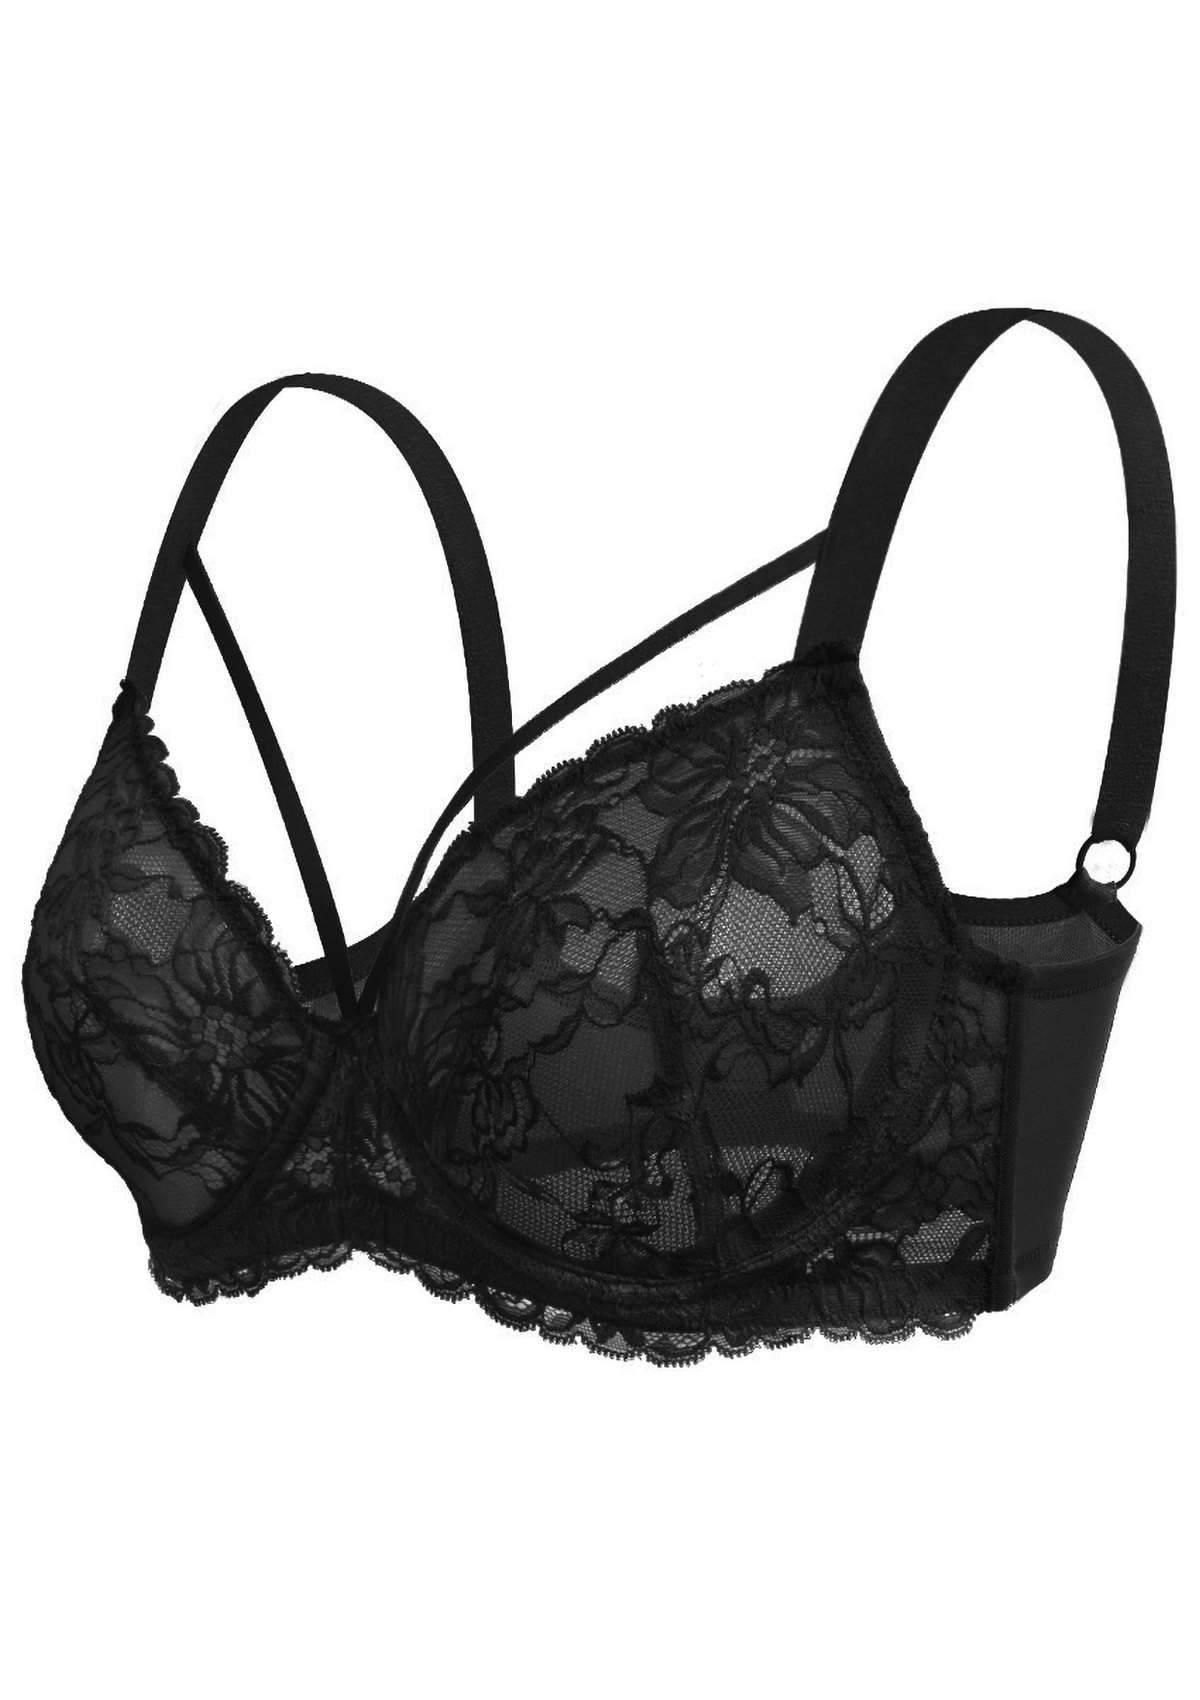 HSIA Pretty In Petals Bra - Plus Size Lingerie For Comfrot And Support - Black / 38 / I